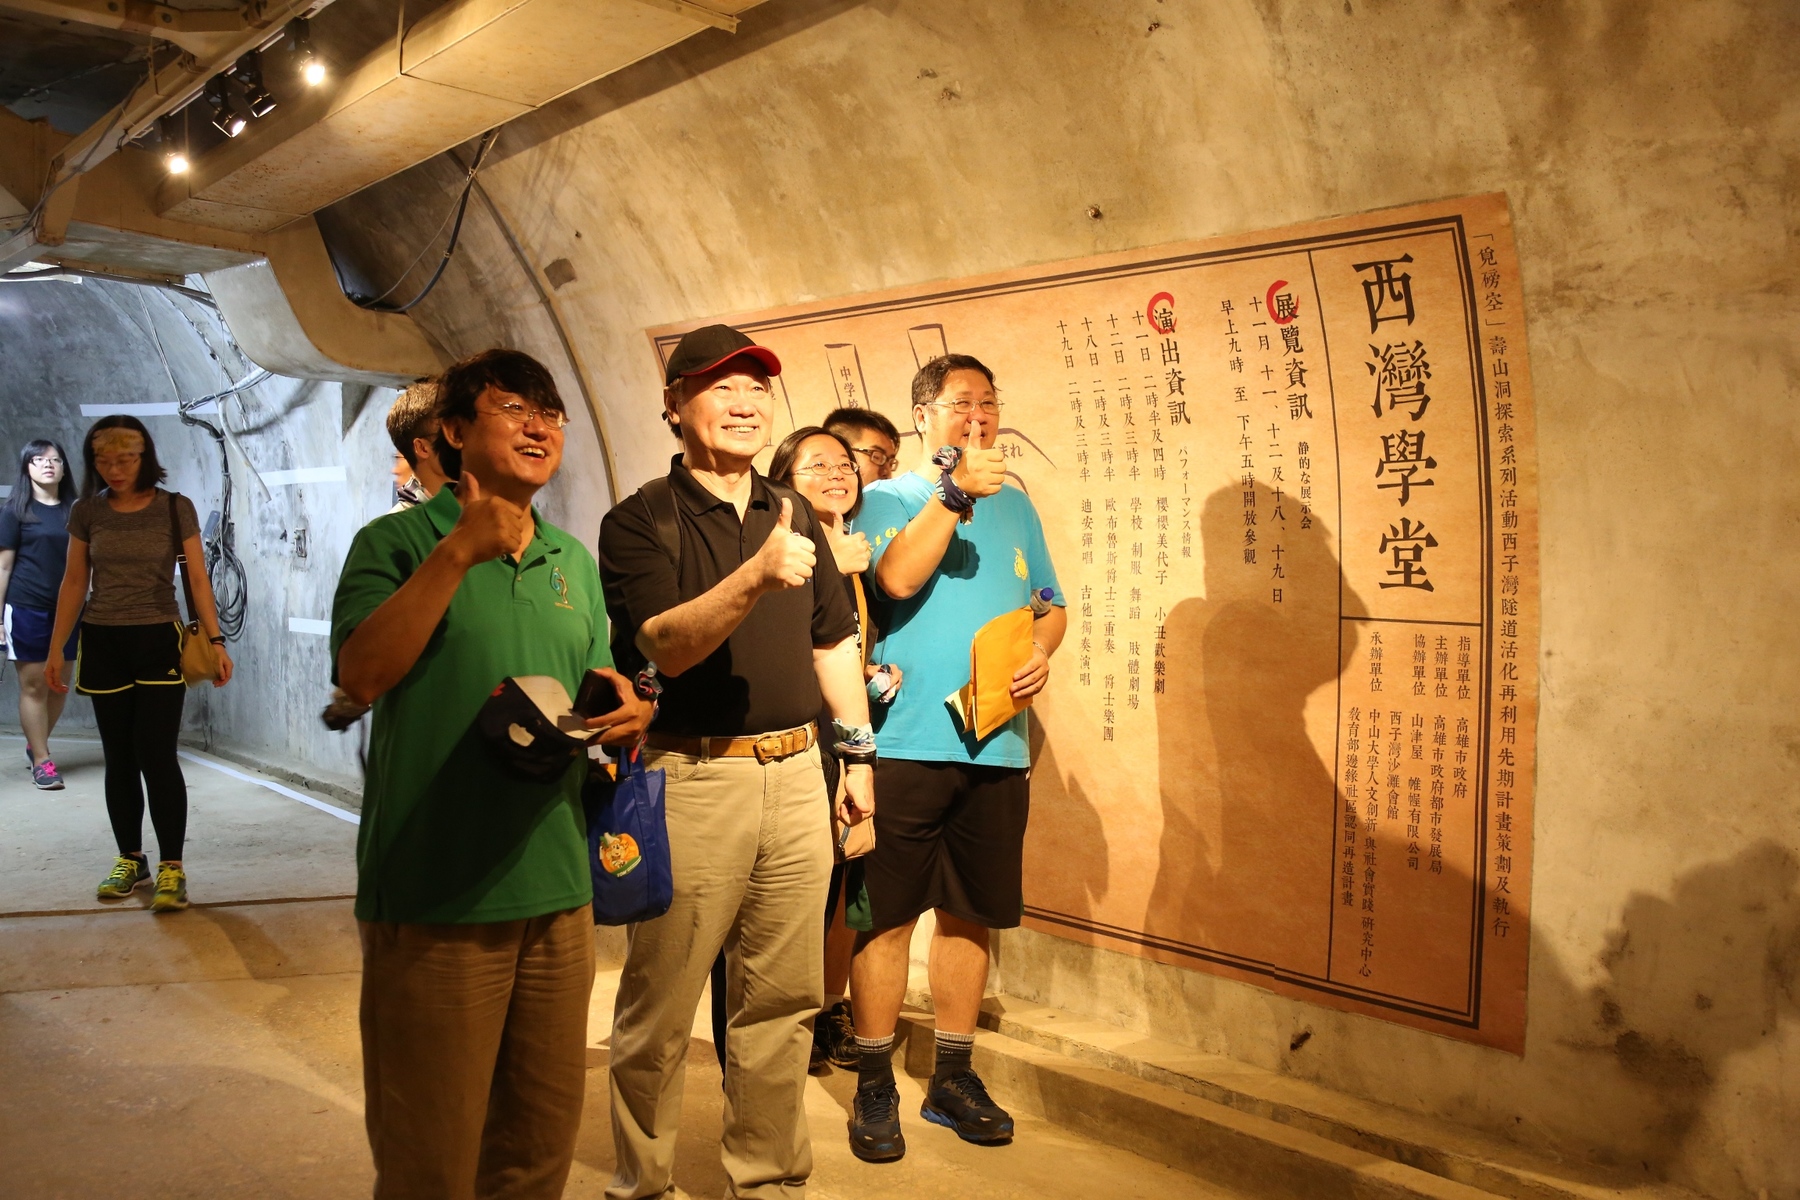 Visitors pose in front of exhibition poster.